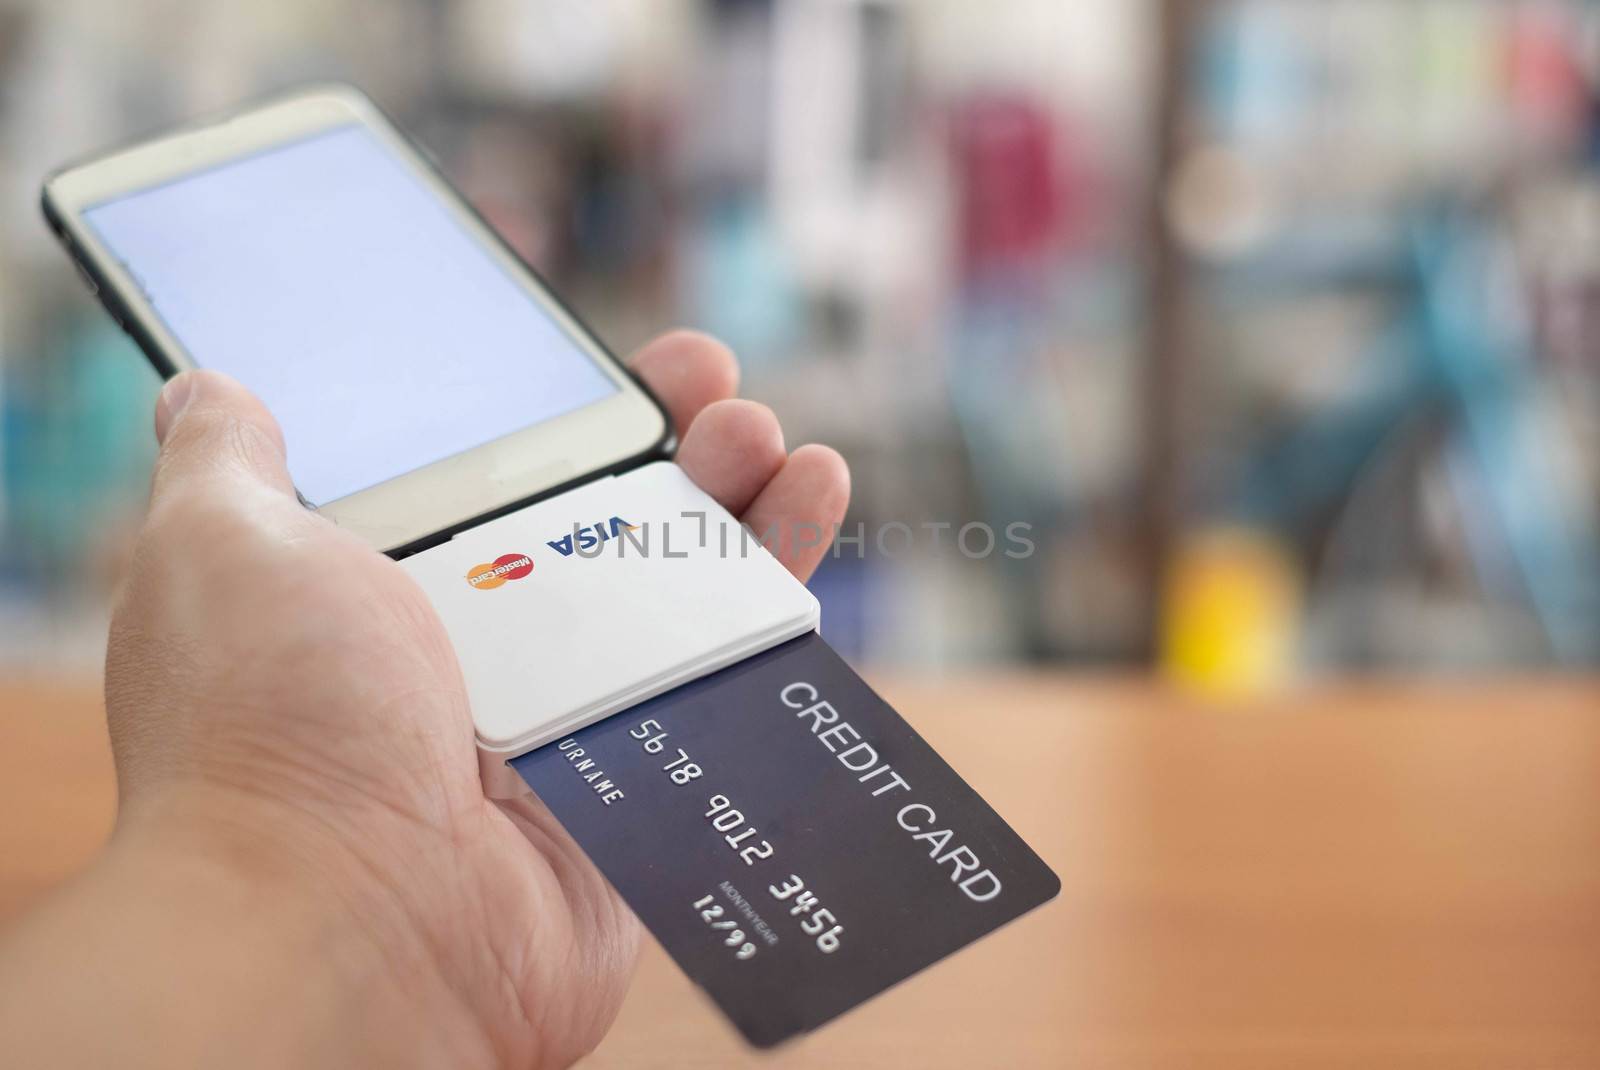 pay for product and service by credit card on Mobile Phone by Mo by Bonn2210